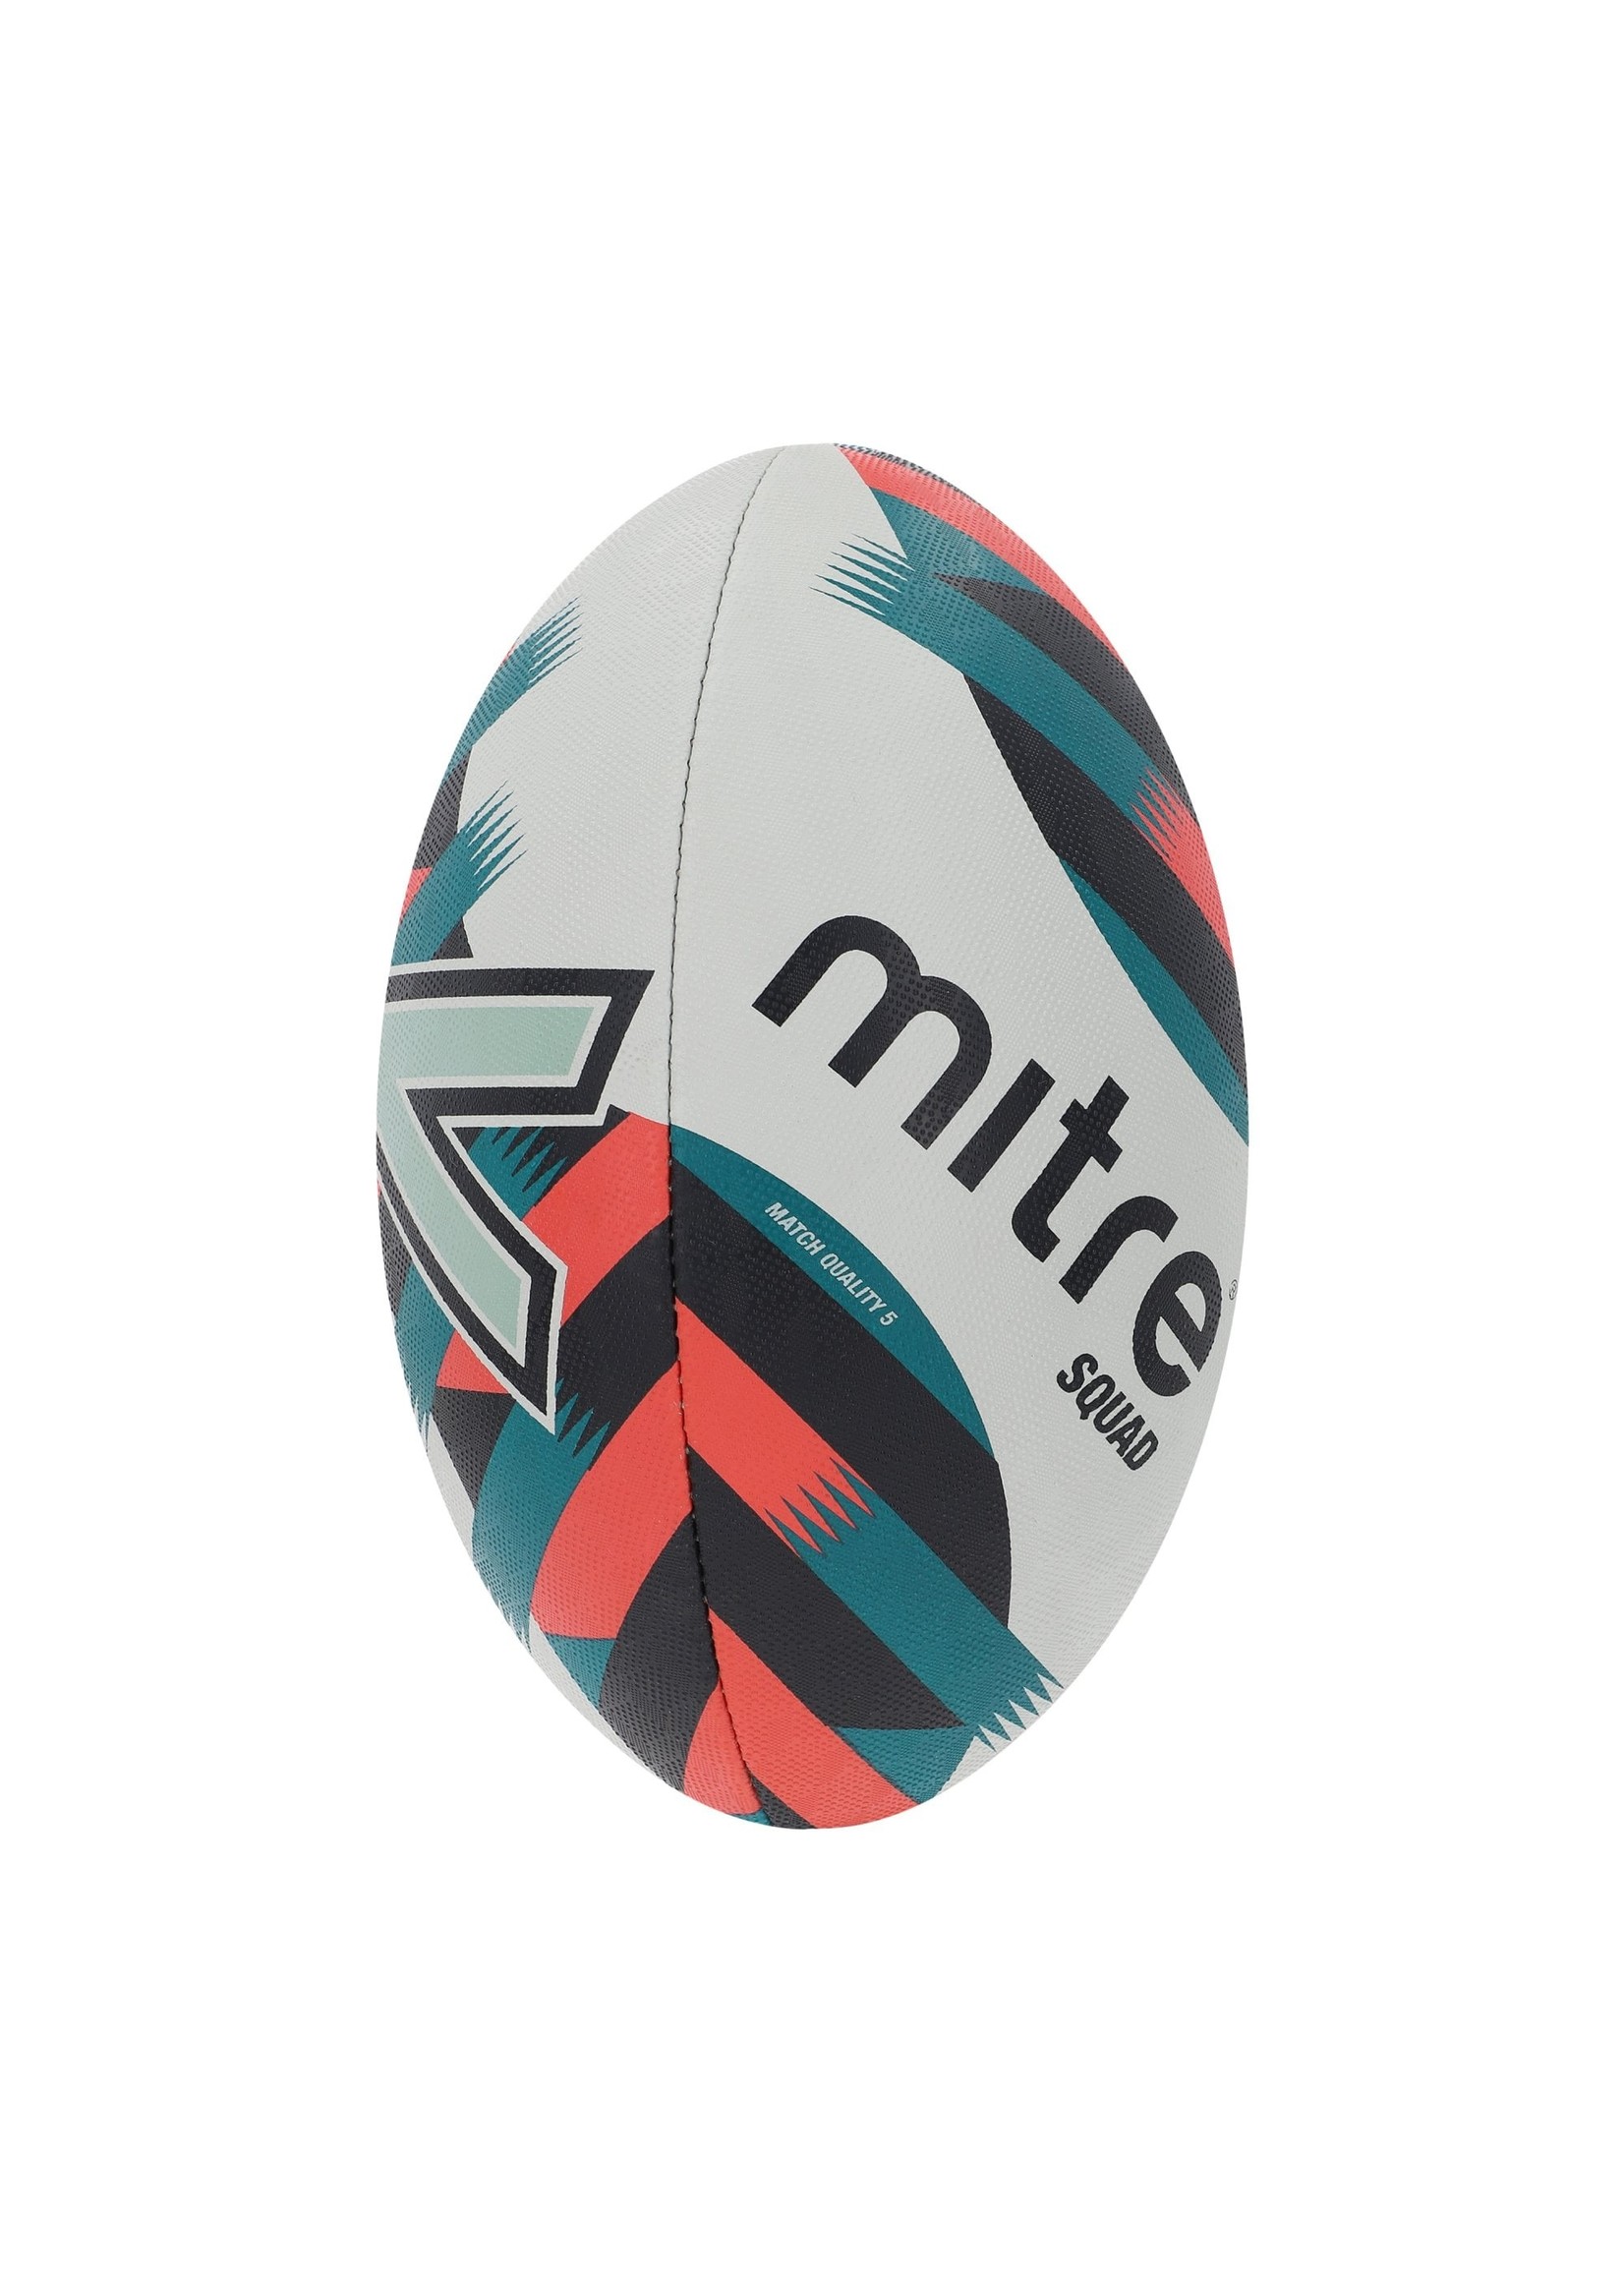 Mitre Mitre Squad Rugby Ball Green Orange 